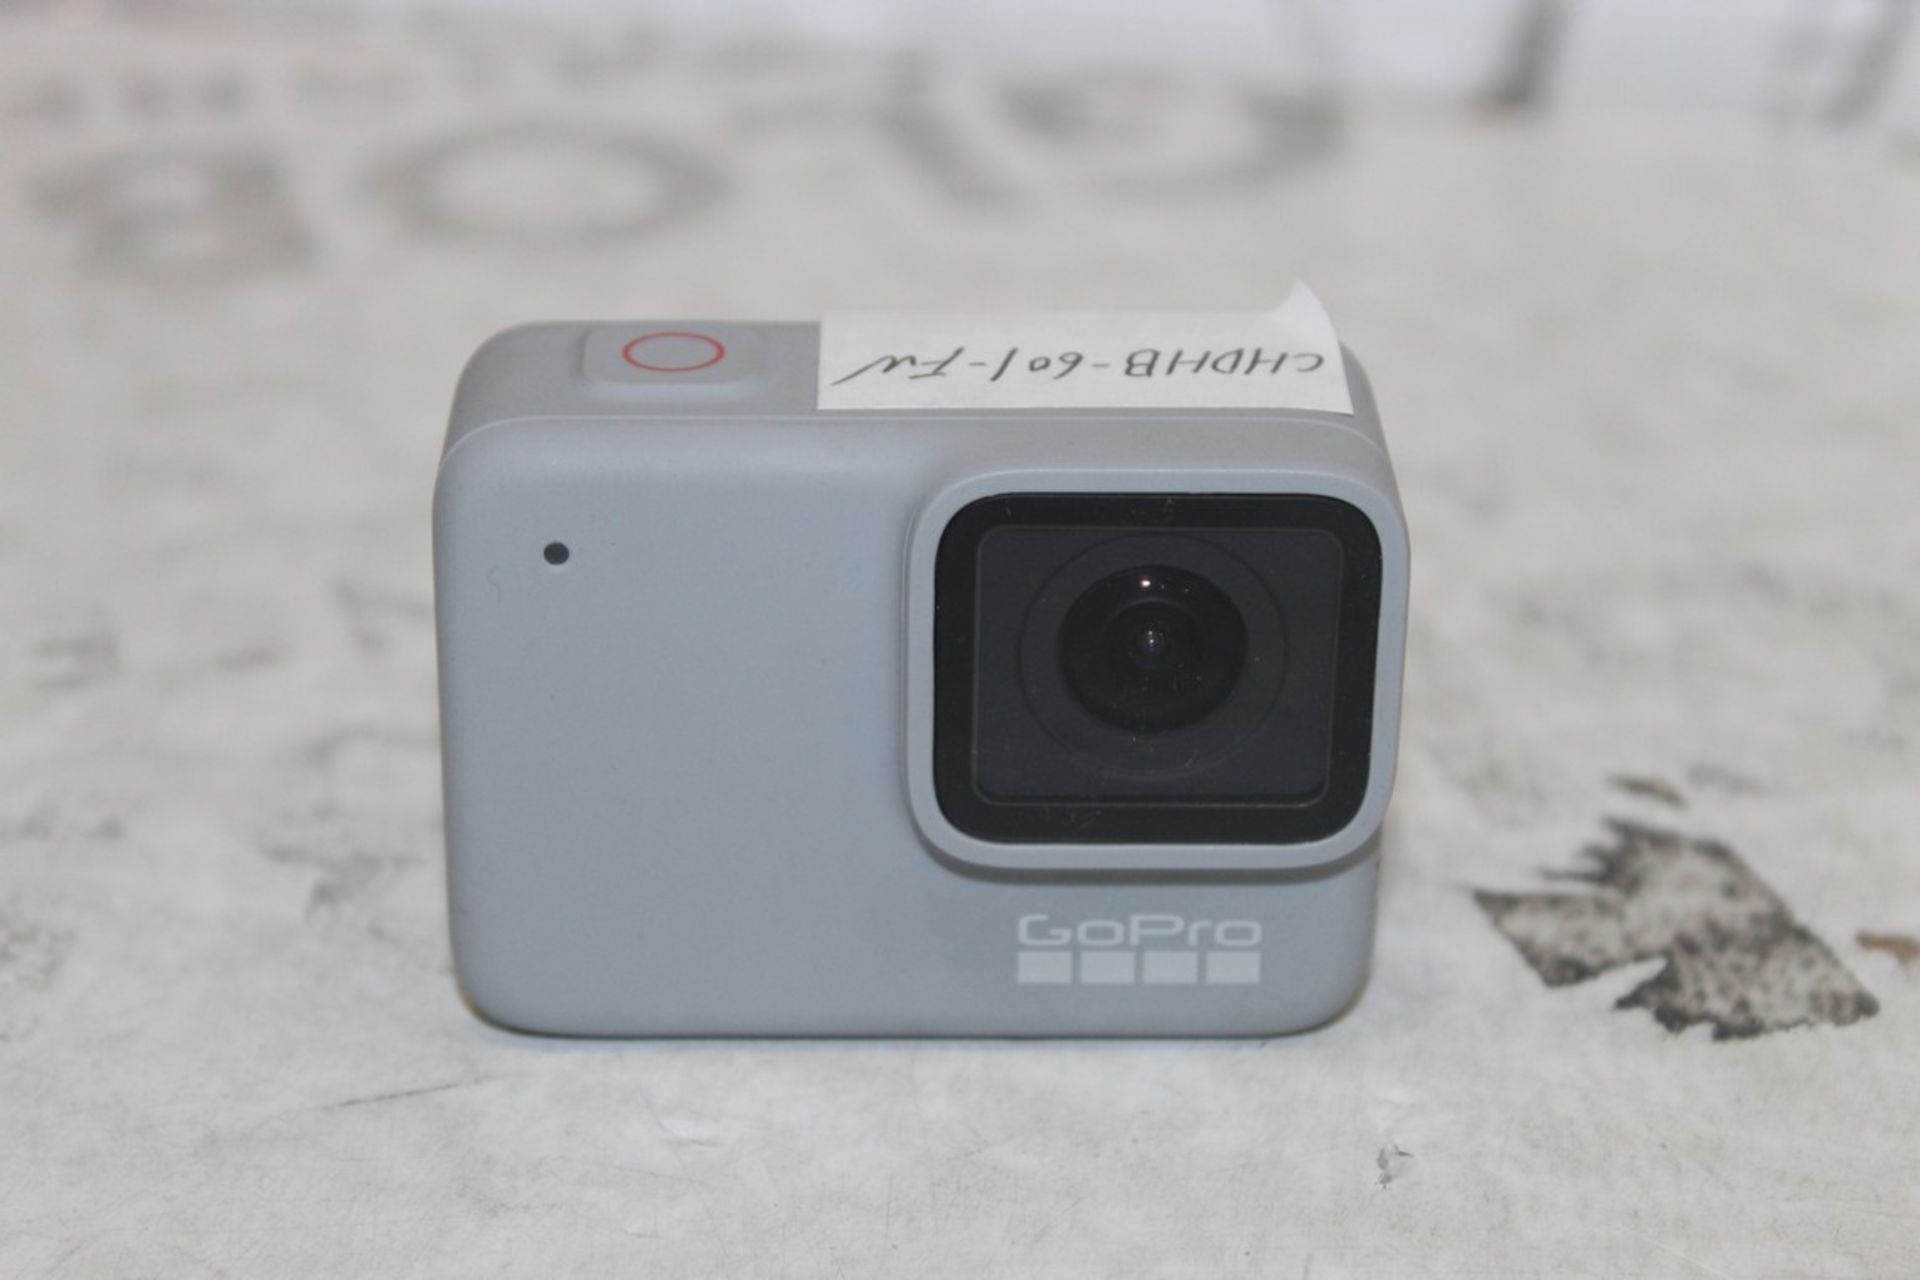 Unboxed Go Pro Hero 7 White Edition Action Camera